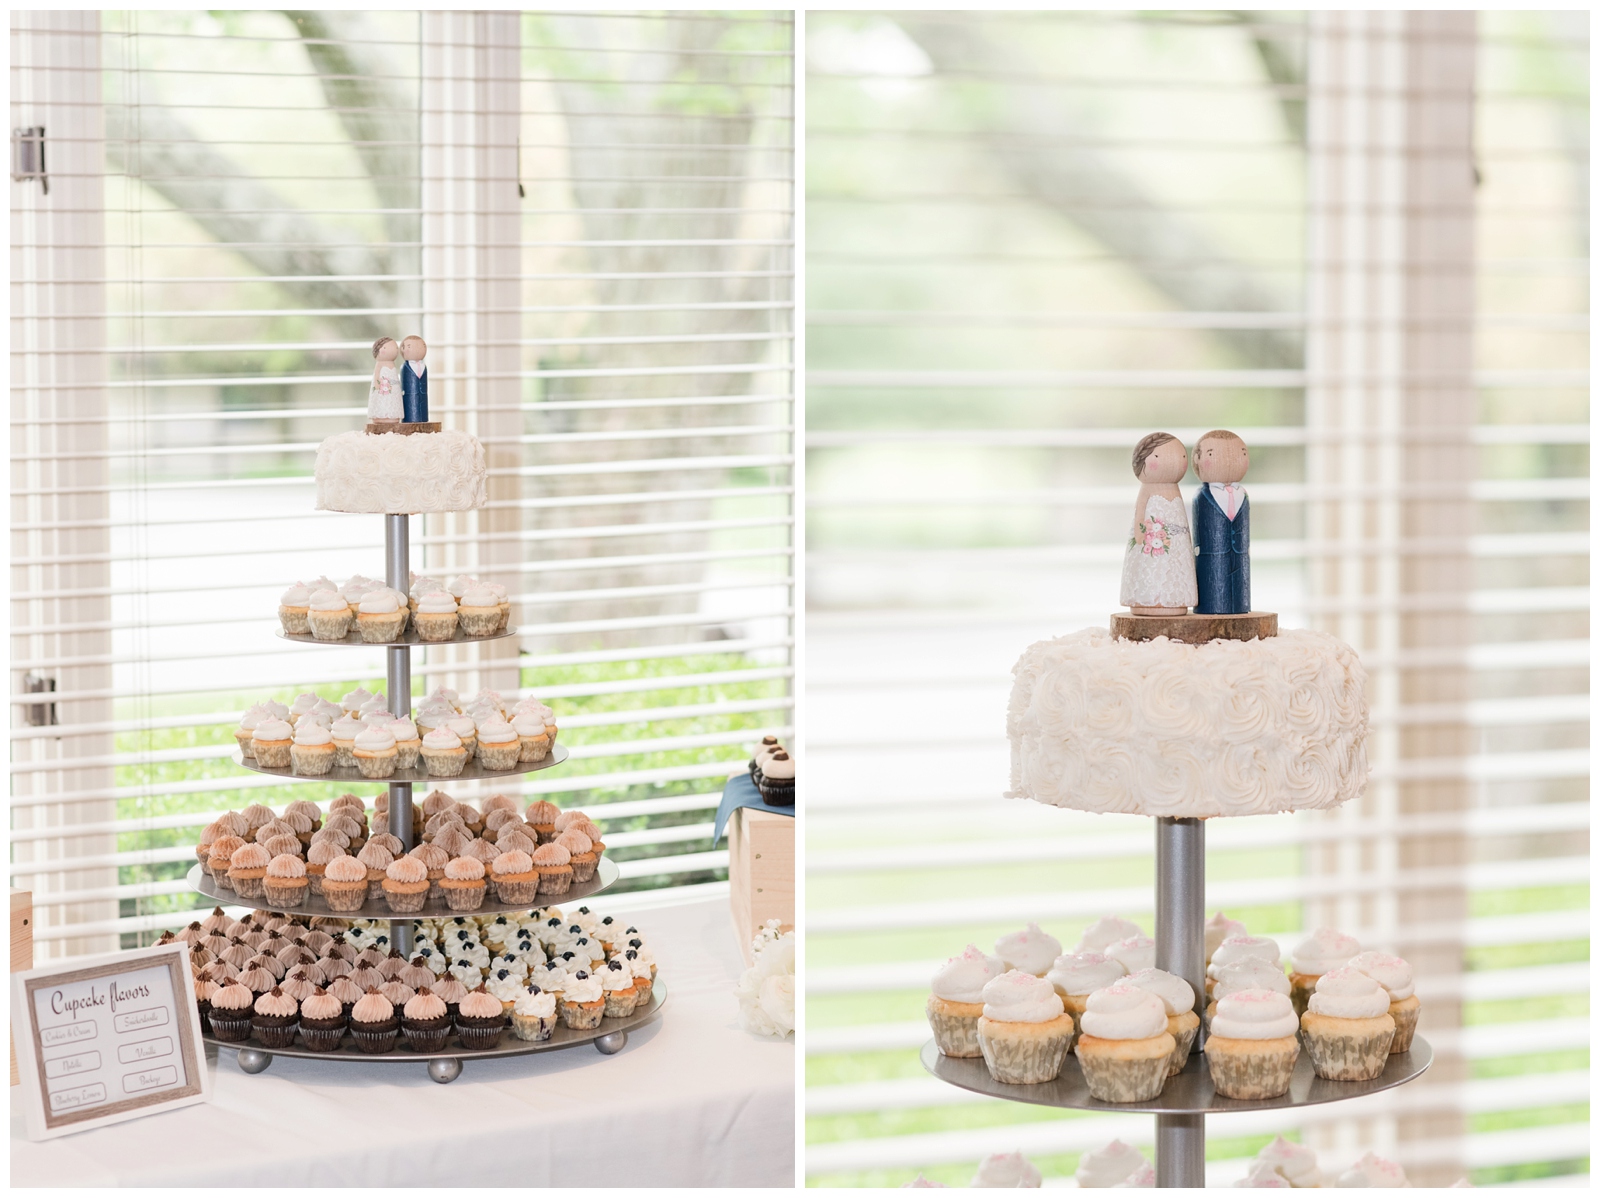 wedding cupcakes with tiny wooden figurines at top of display by Polkadot Cupcakery